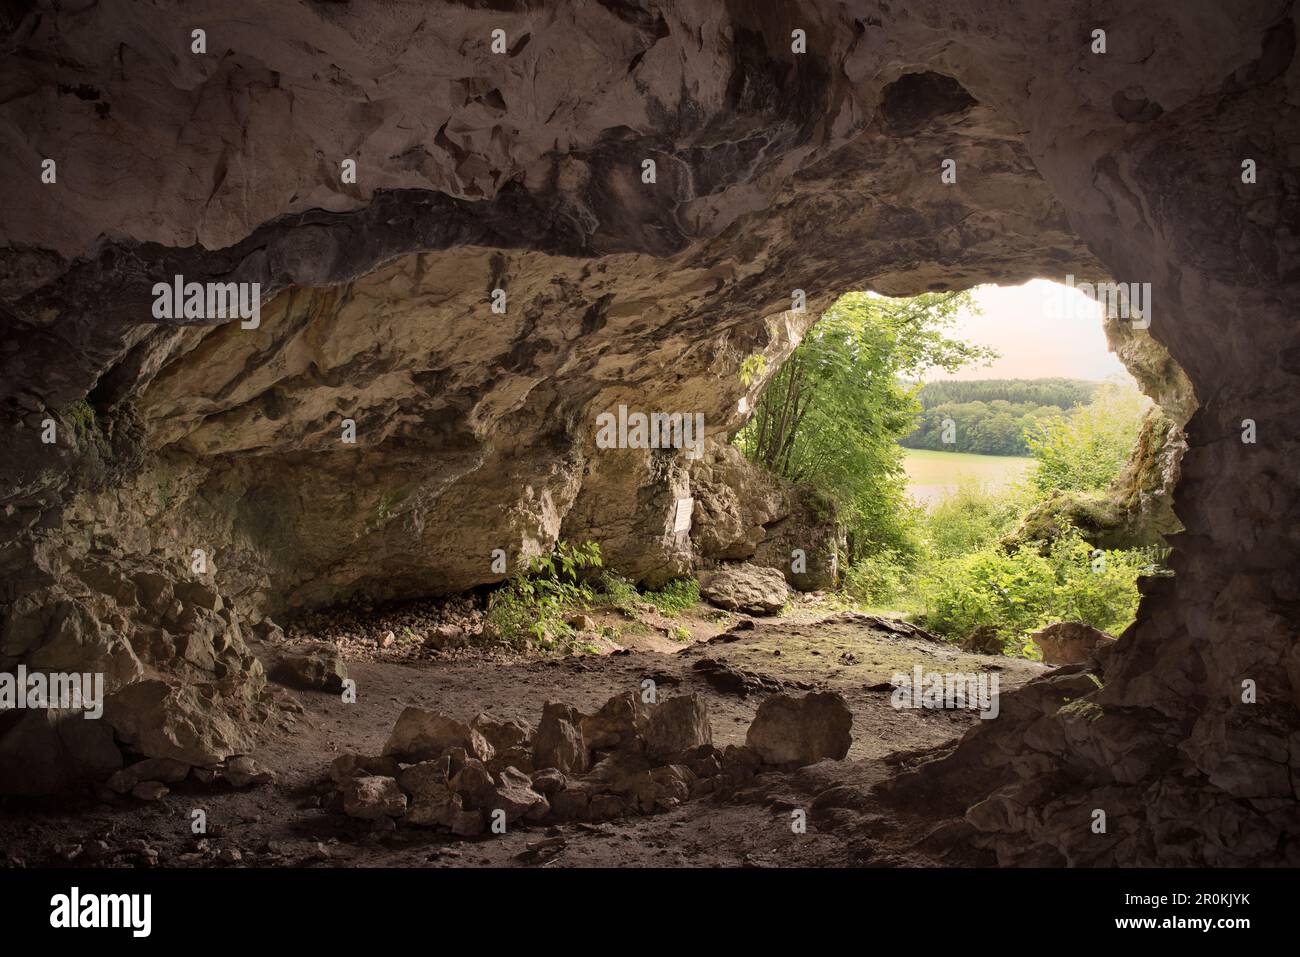 UNESCO World Heritage Ice Age Caves of the Swabian Alb, Bockstein Cave, Baden-Wuerttemberg, Germany Stock Photo